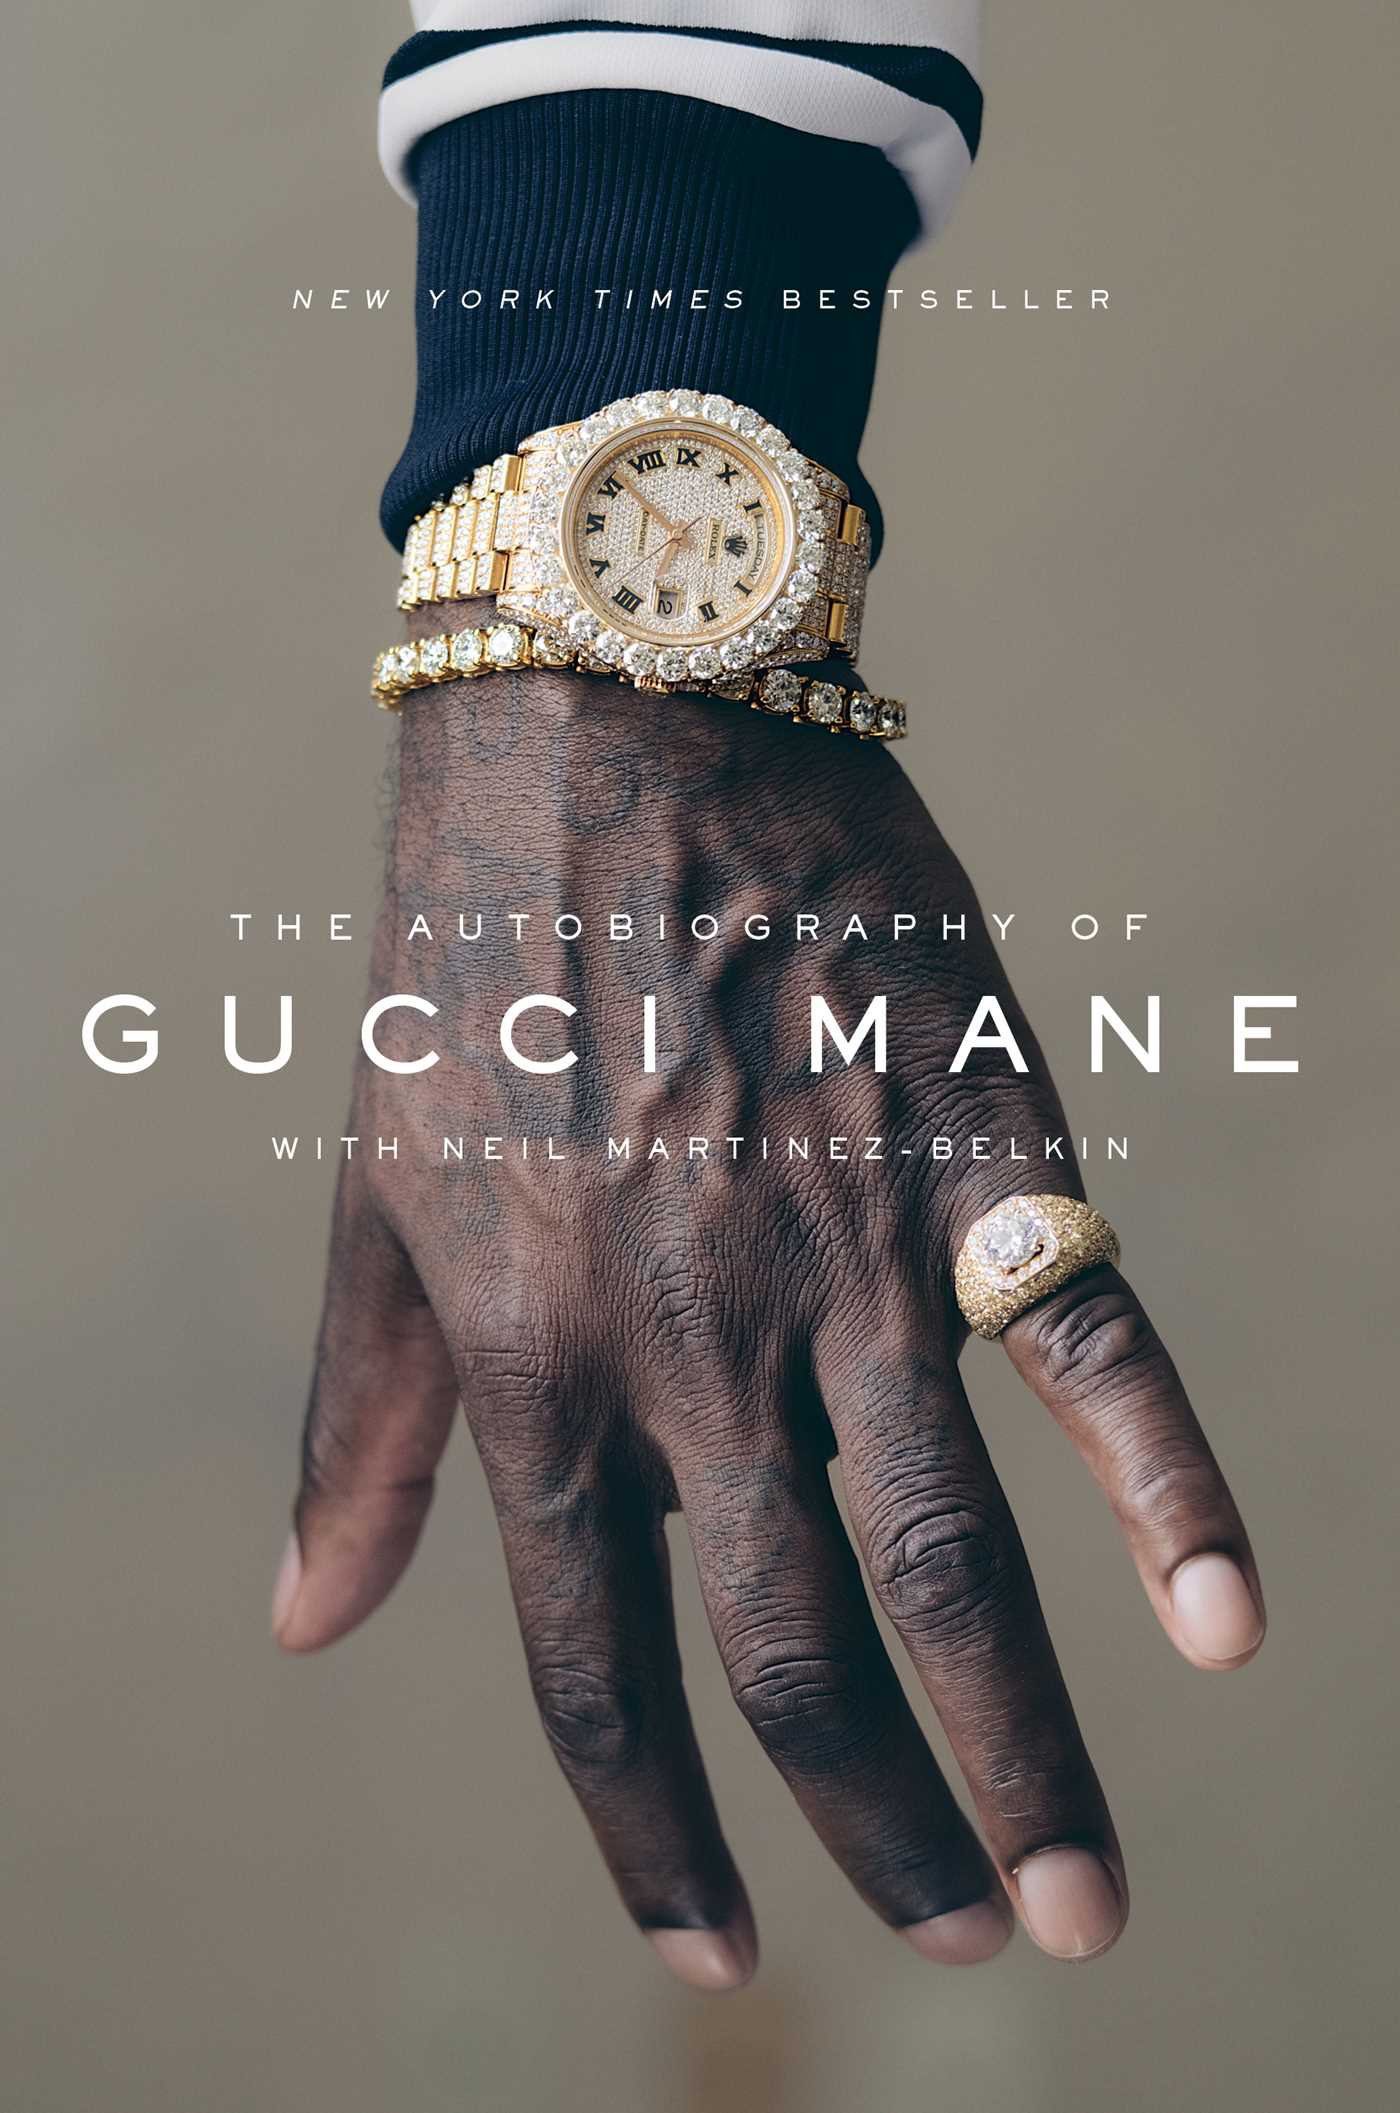 The Autobiography of Gucci Mane by Gucci Mane and Neil Martinez-Belkin